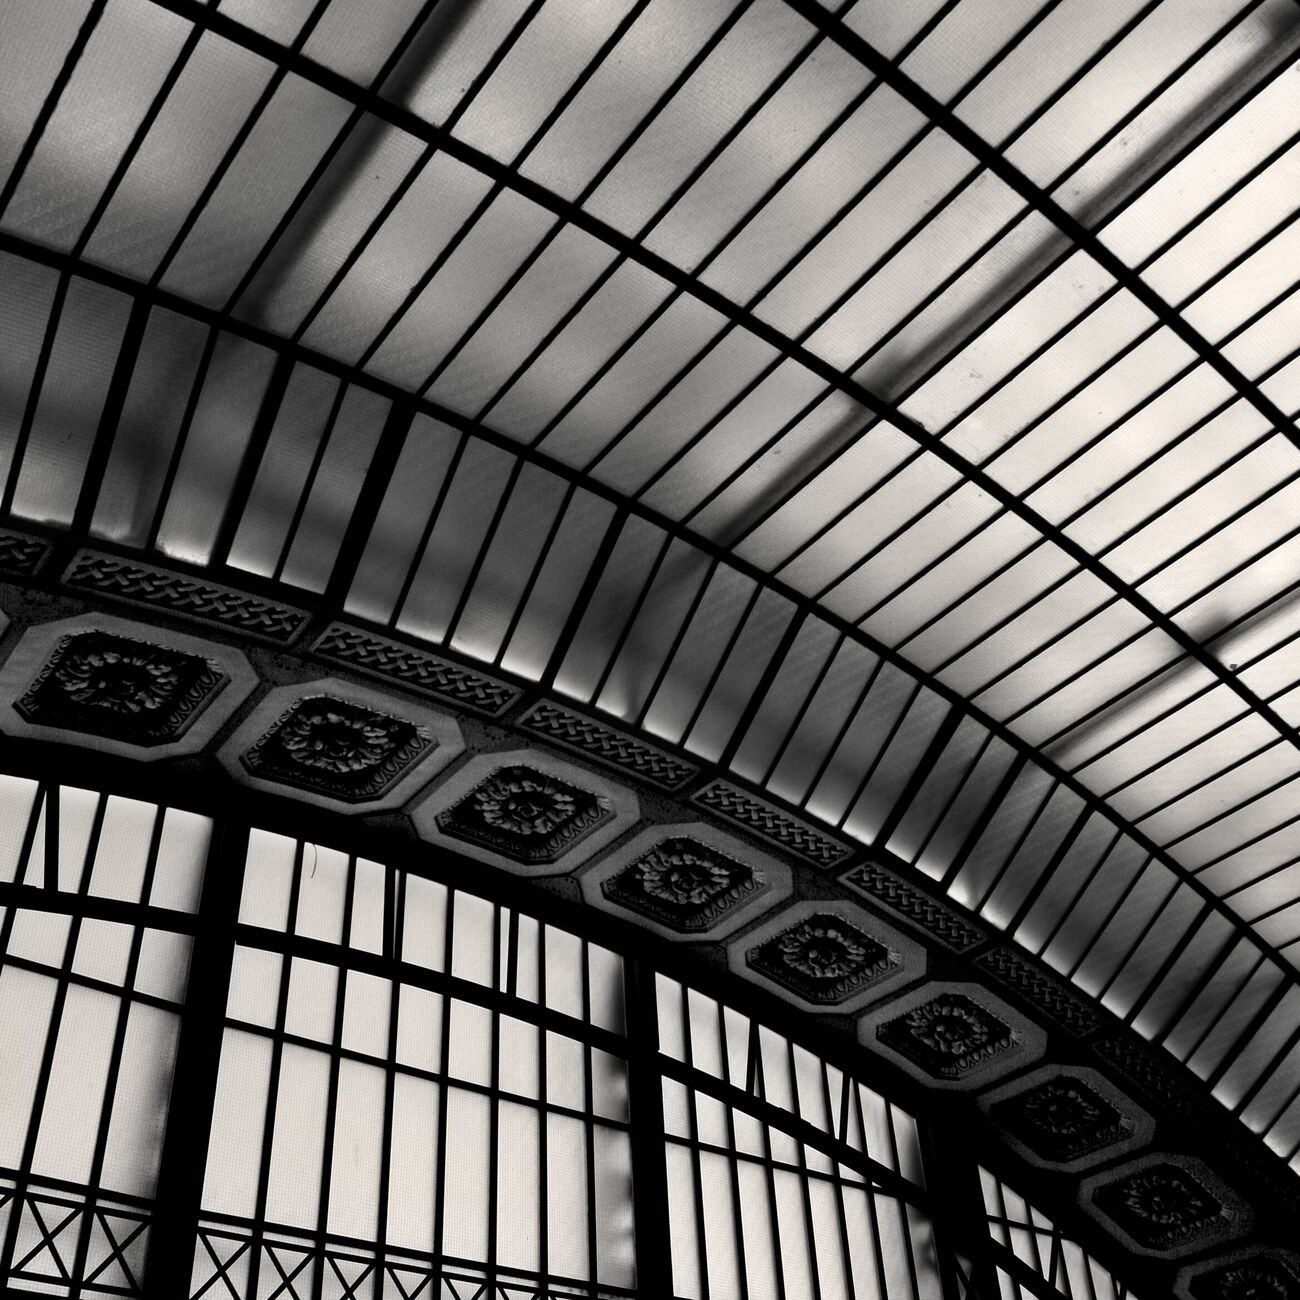 Achat tirage 23 x 23 cm, Orsay museum glass roof I. Ref-561-1 - Denis Olivier Photographie d'Art